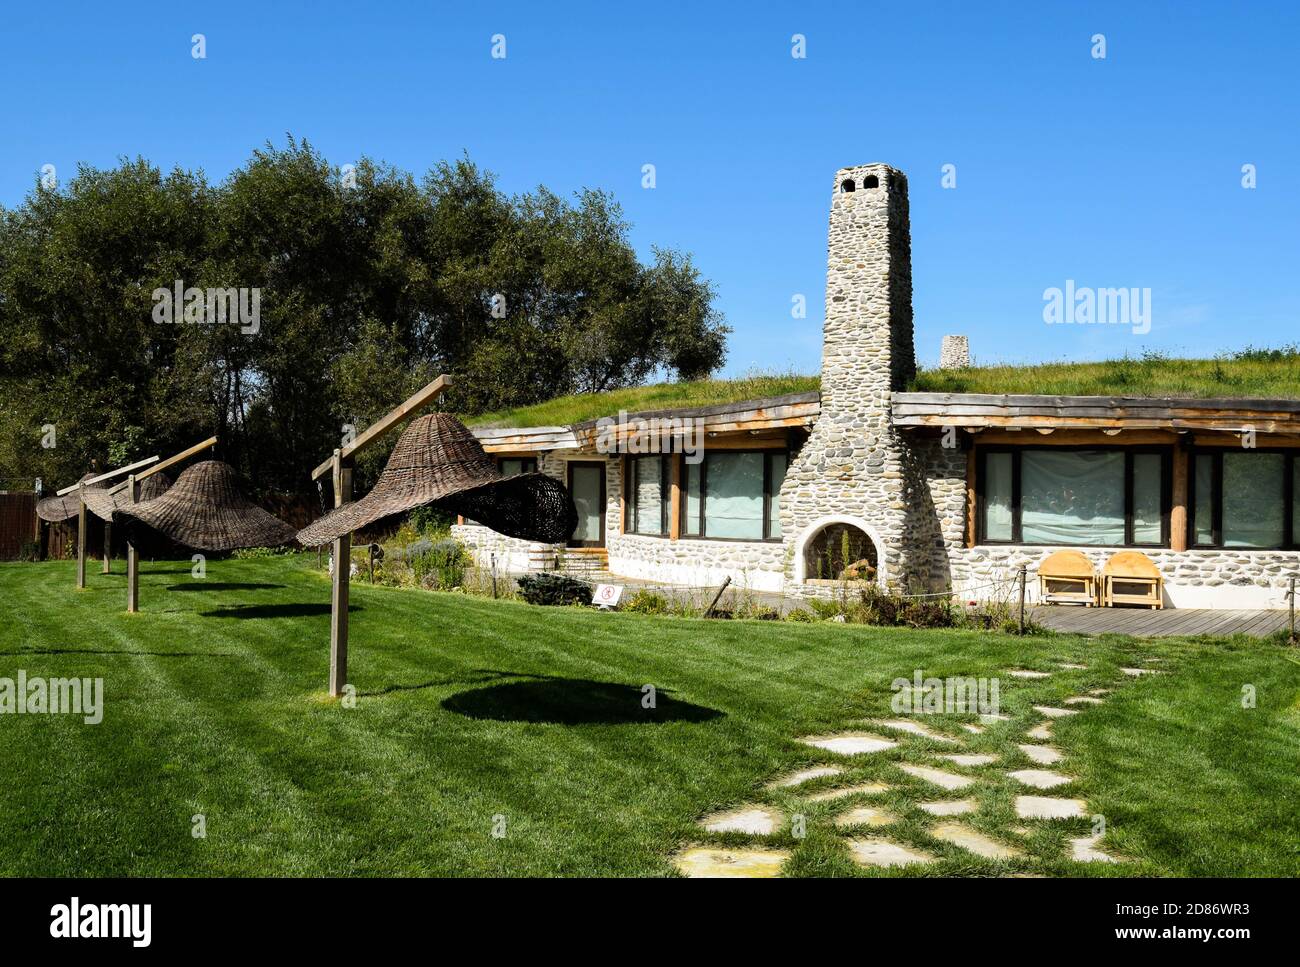 Old stone restaurant as the hobbit's house. Umbrellas made of woven branches photographed on a sunny day with blue sky. Stock Photo